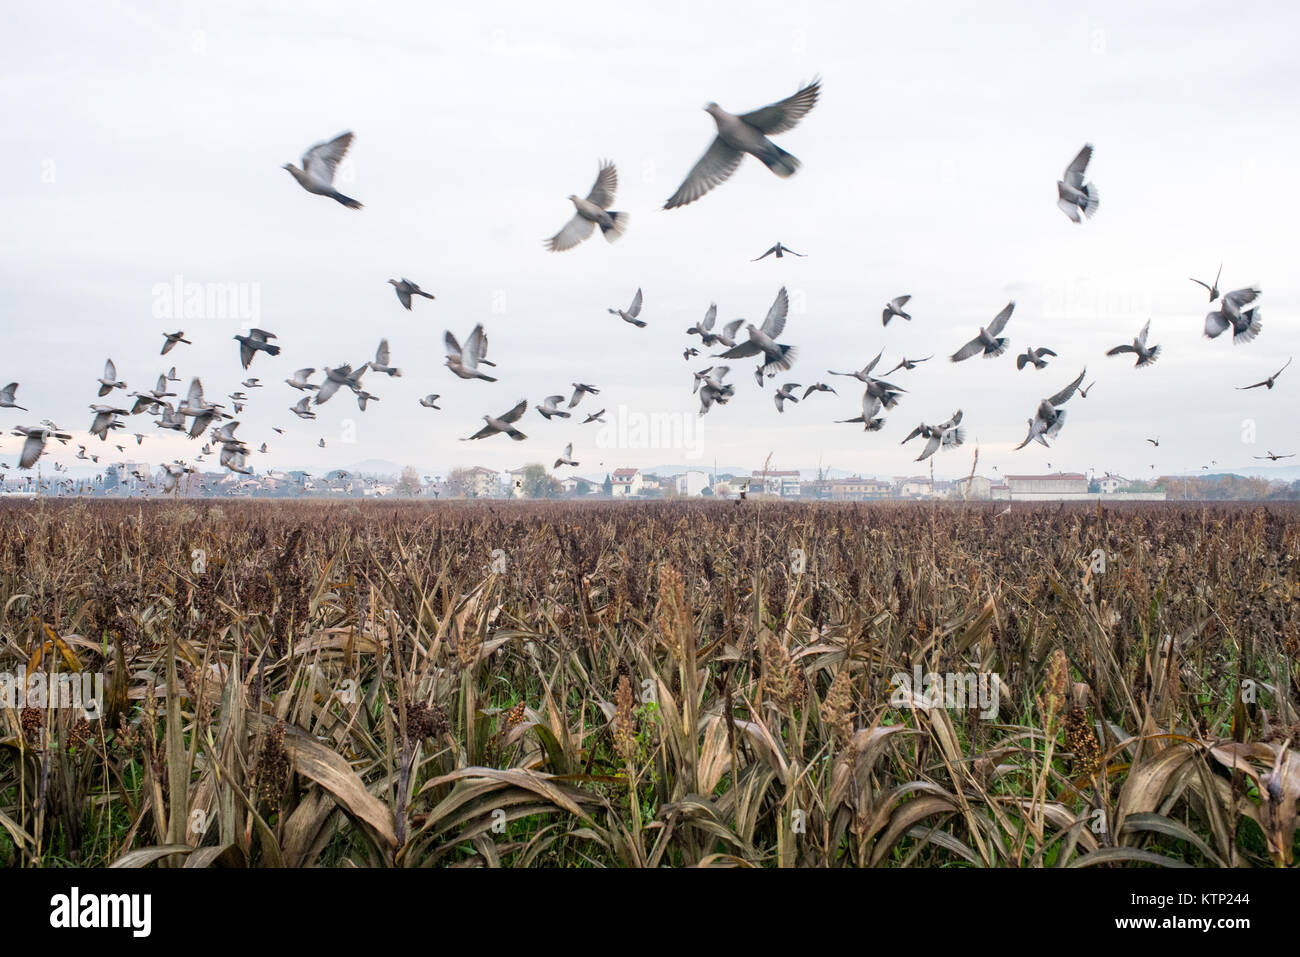 View of a flock of birds flying from a mile field in the Tuscan countryside on a gray day Stock Photo